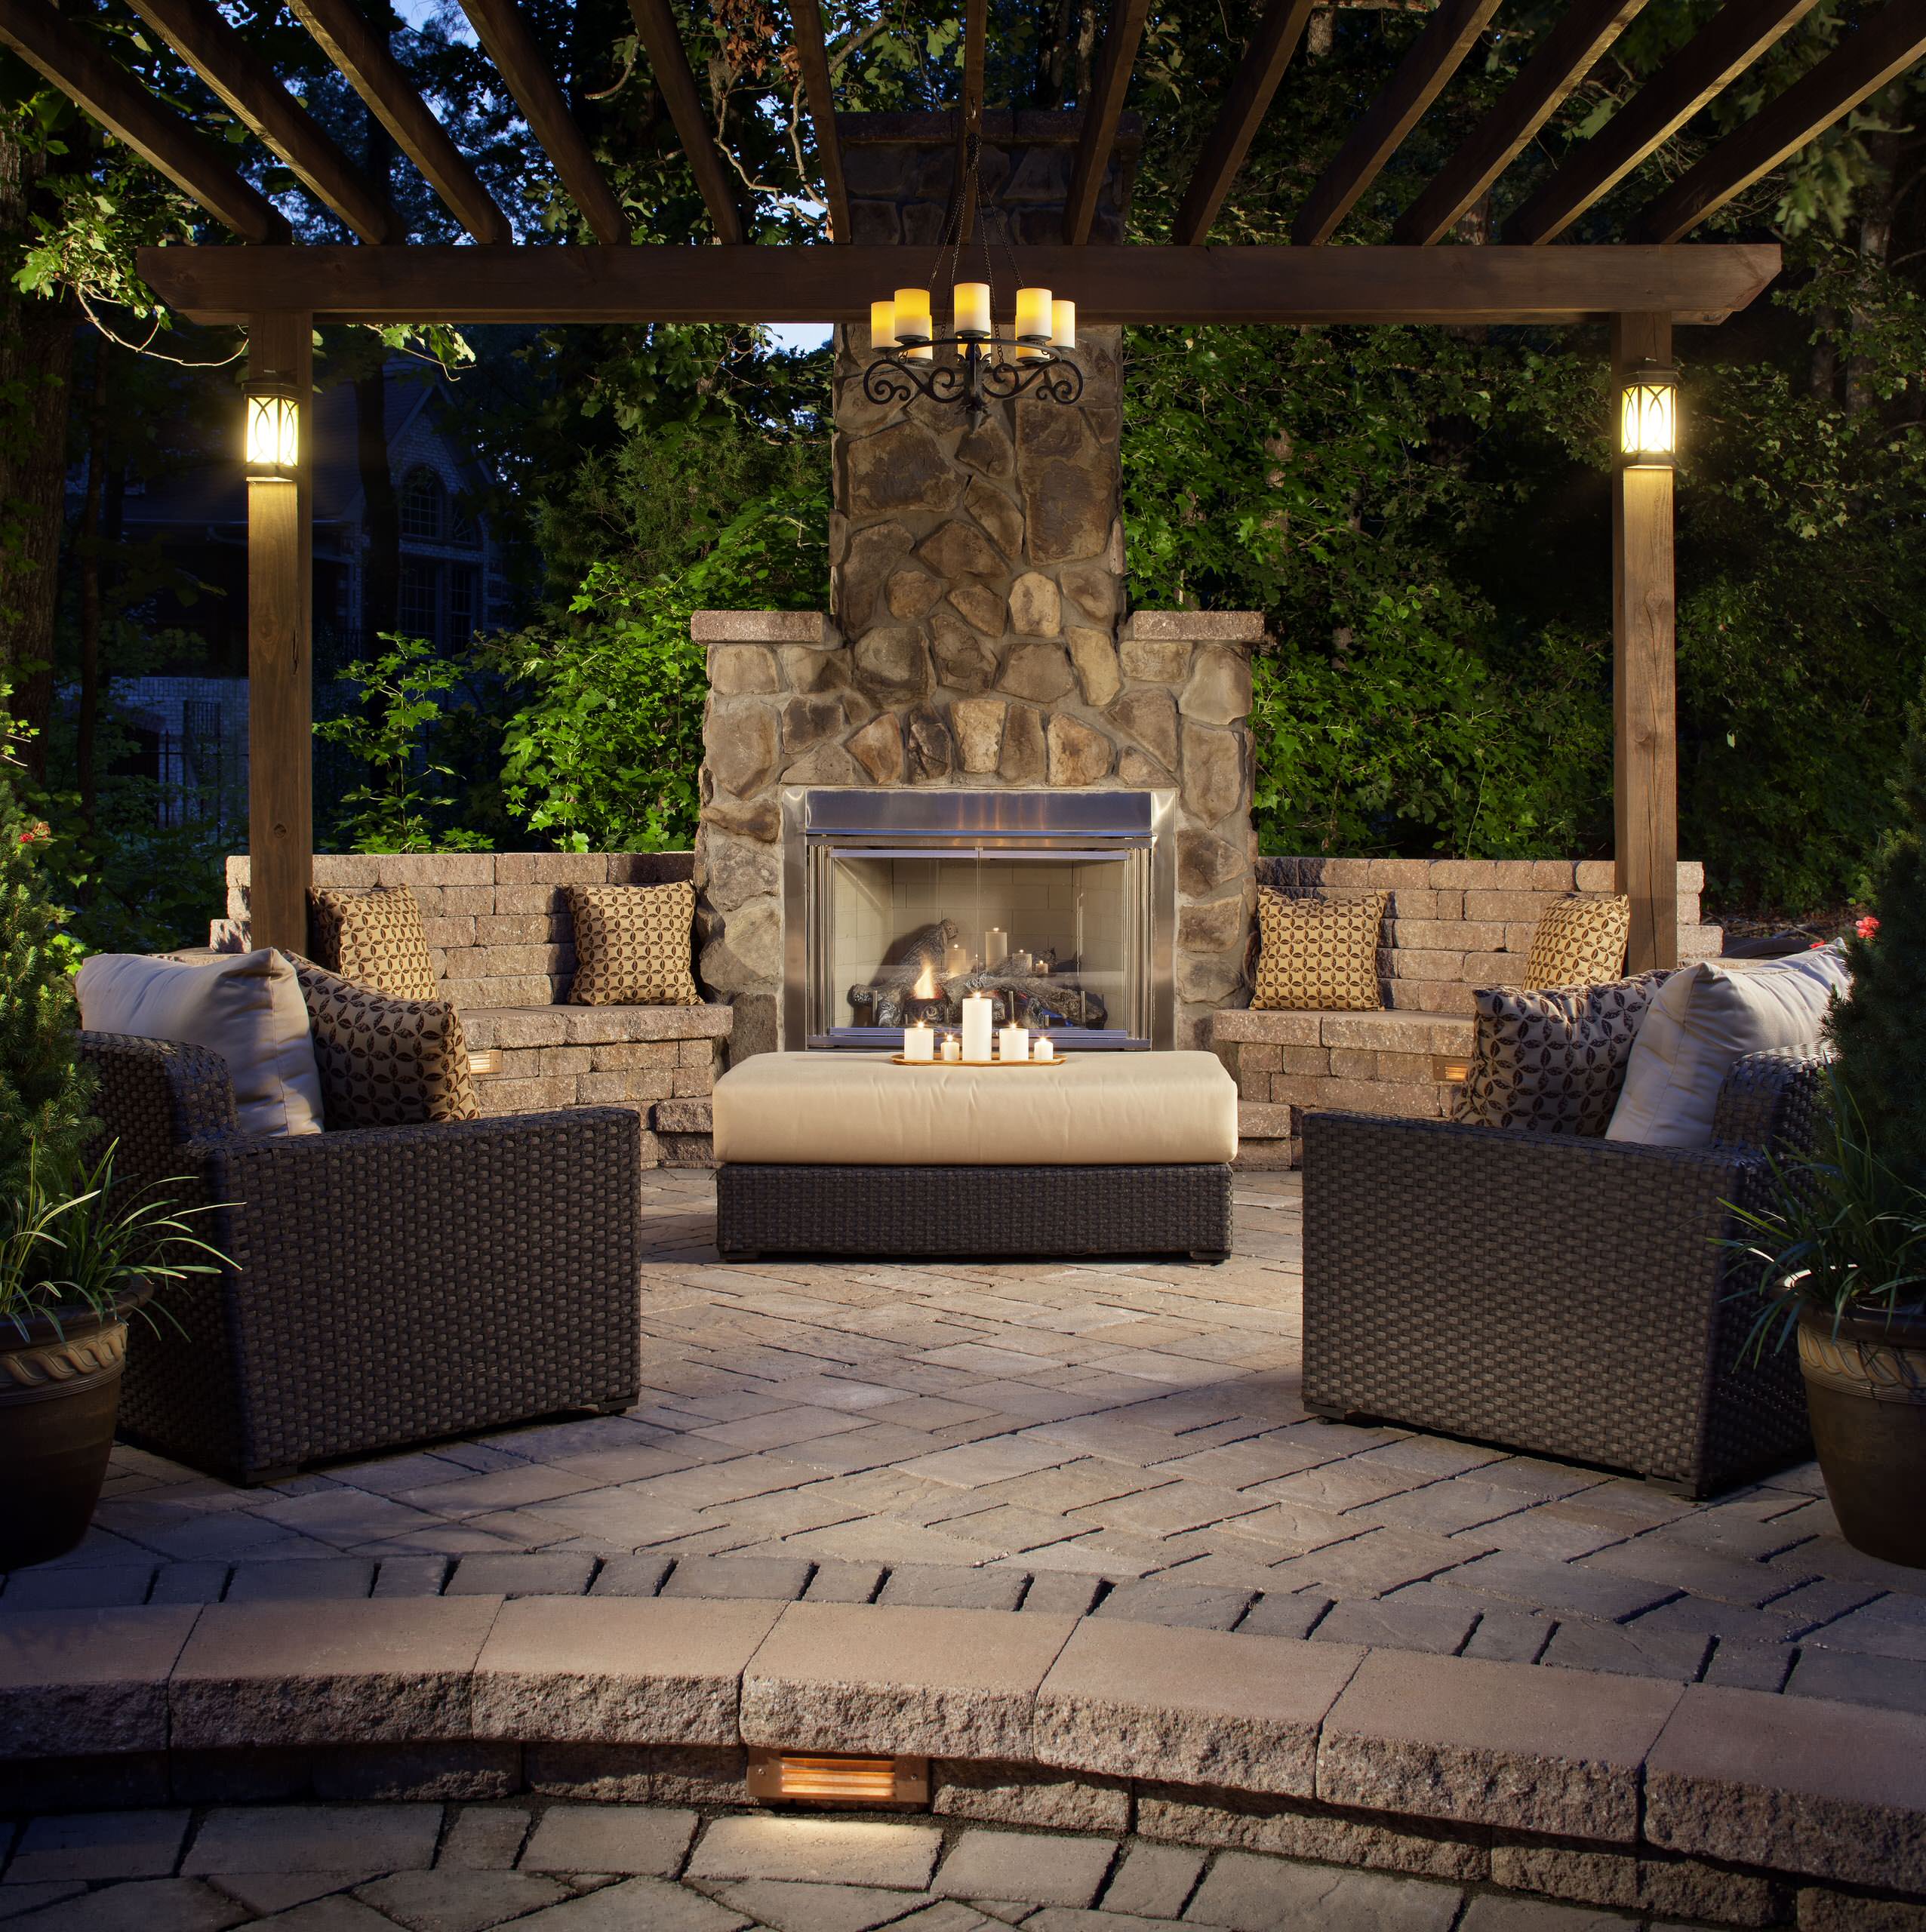 75 Outdoor with a Gazebo Ideas You'll Love - August, 2022 | Houzz